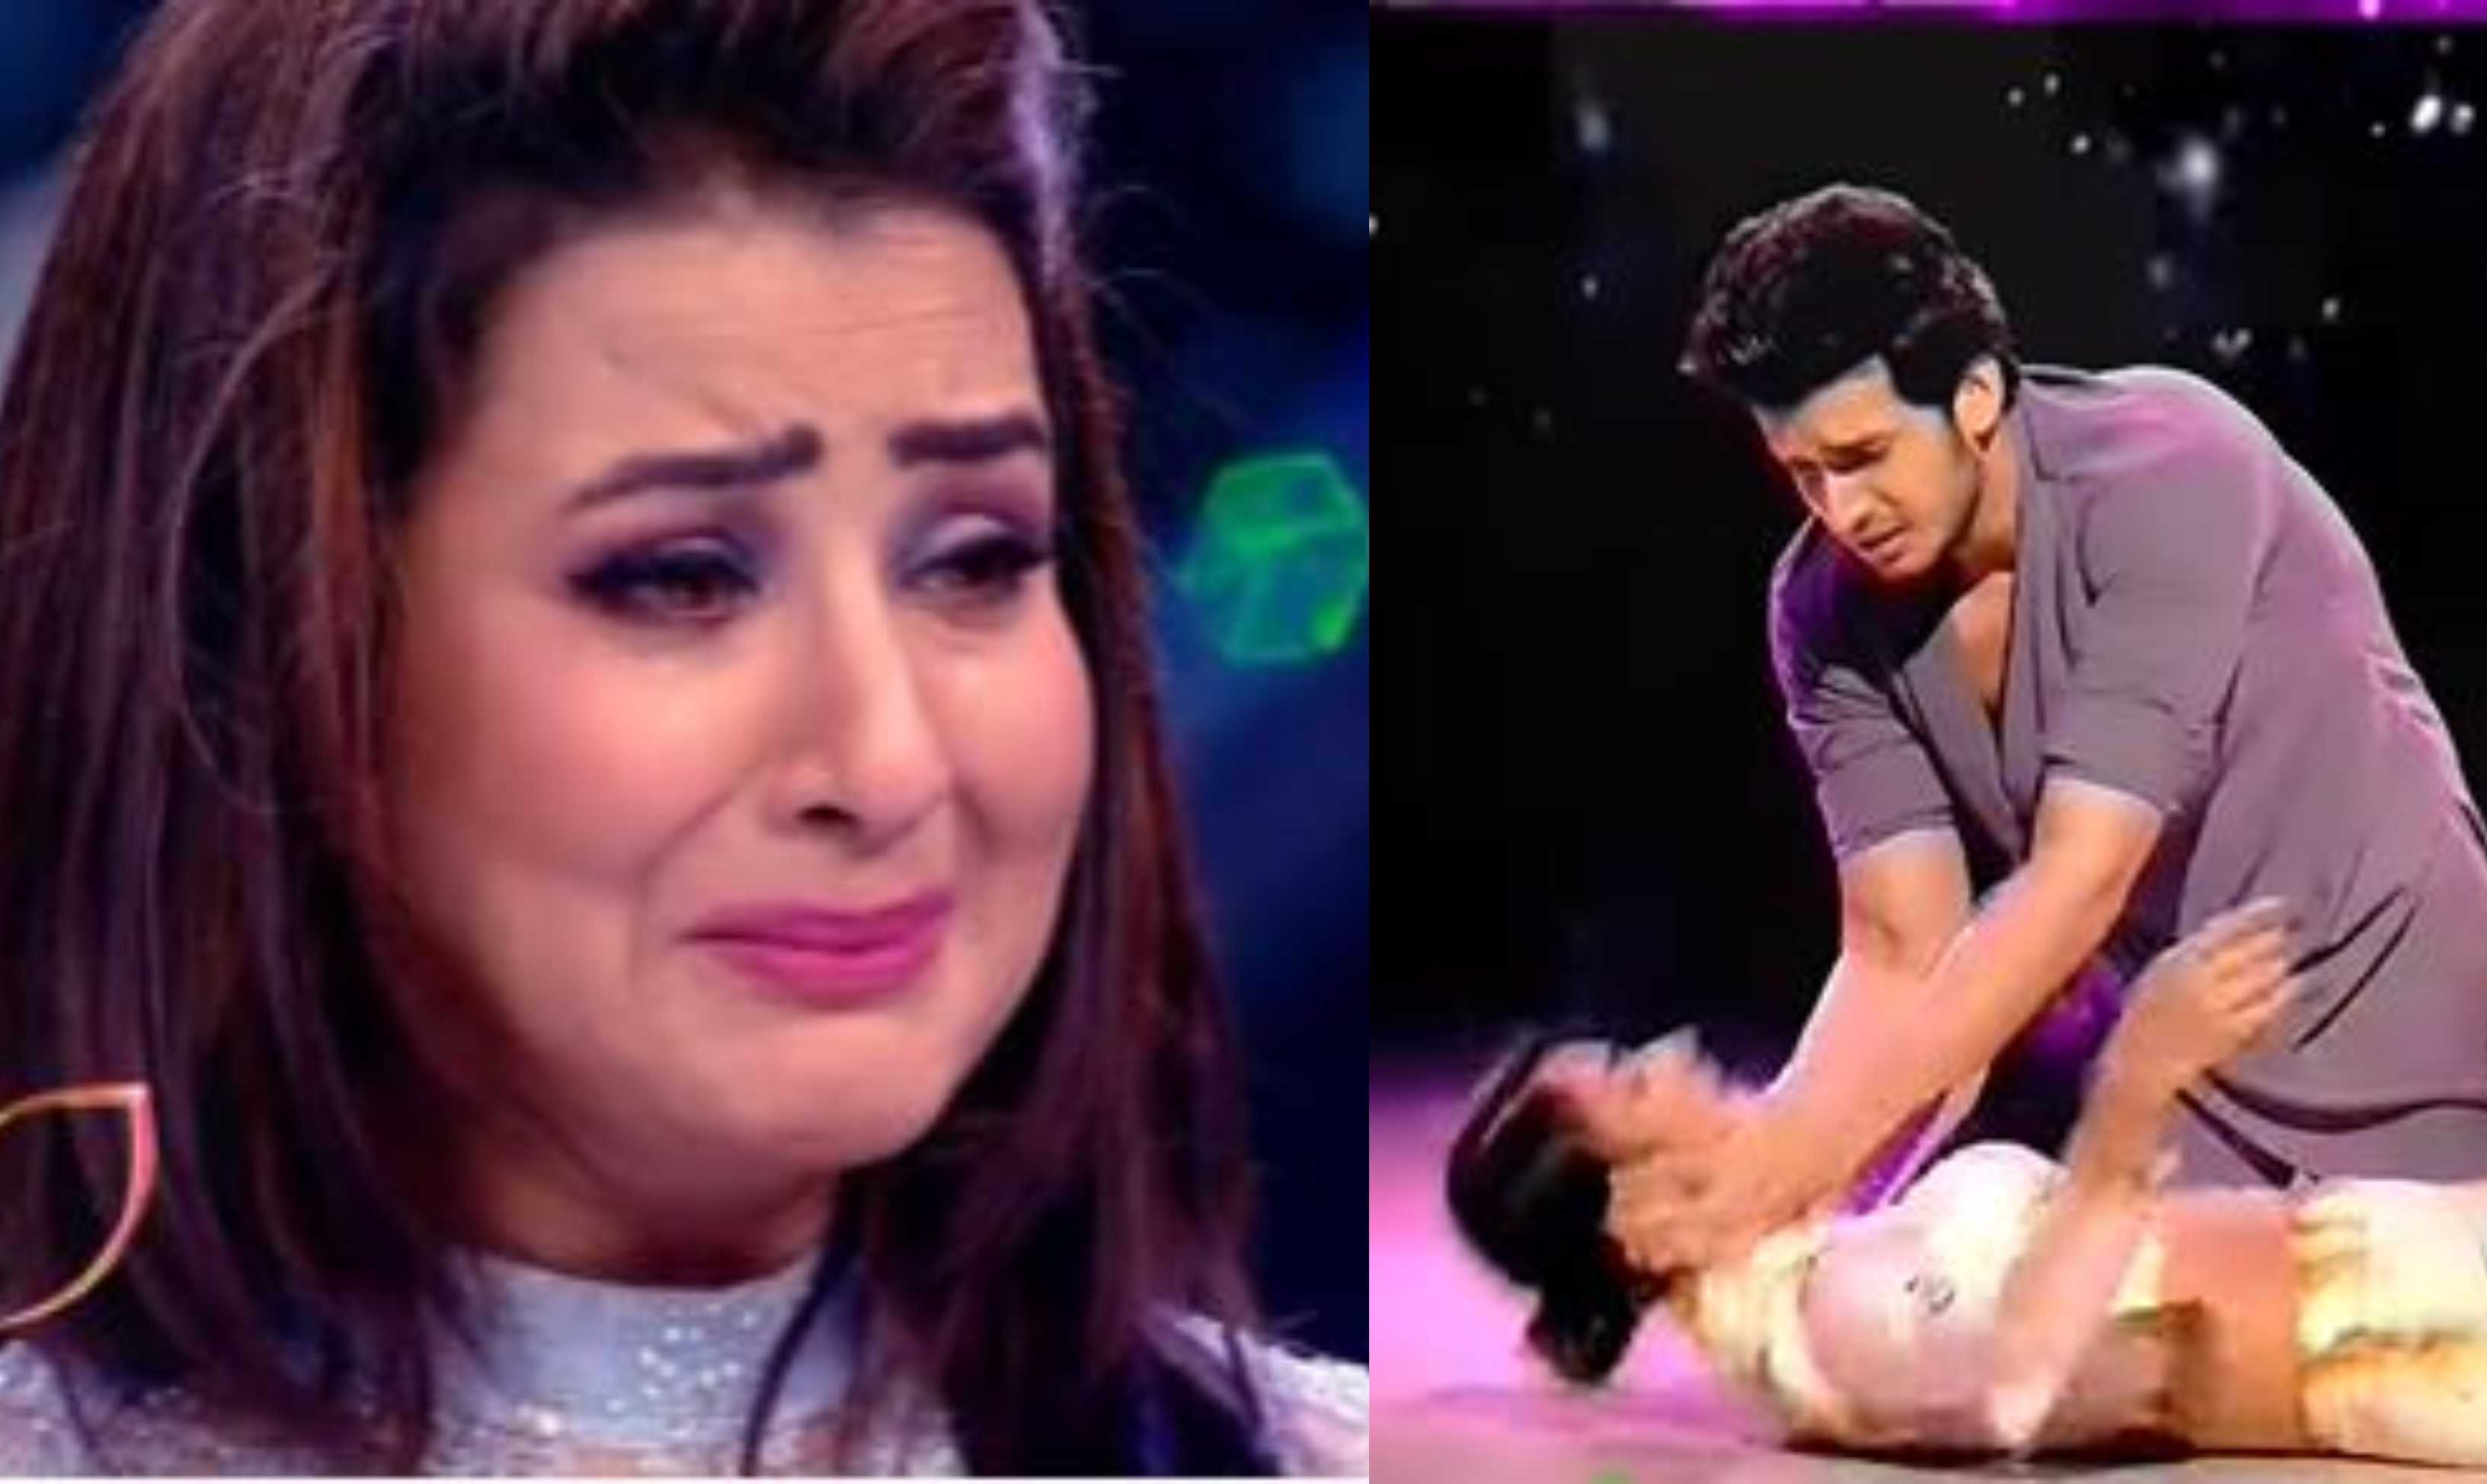 Jhalak Dikhhla Jaa 10: Shilpa Shinde says her family abandoned her, Paras Kalnawat remembers his late father